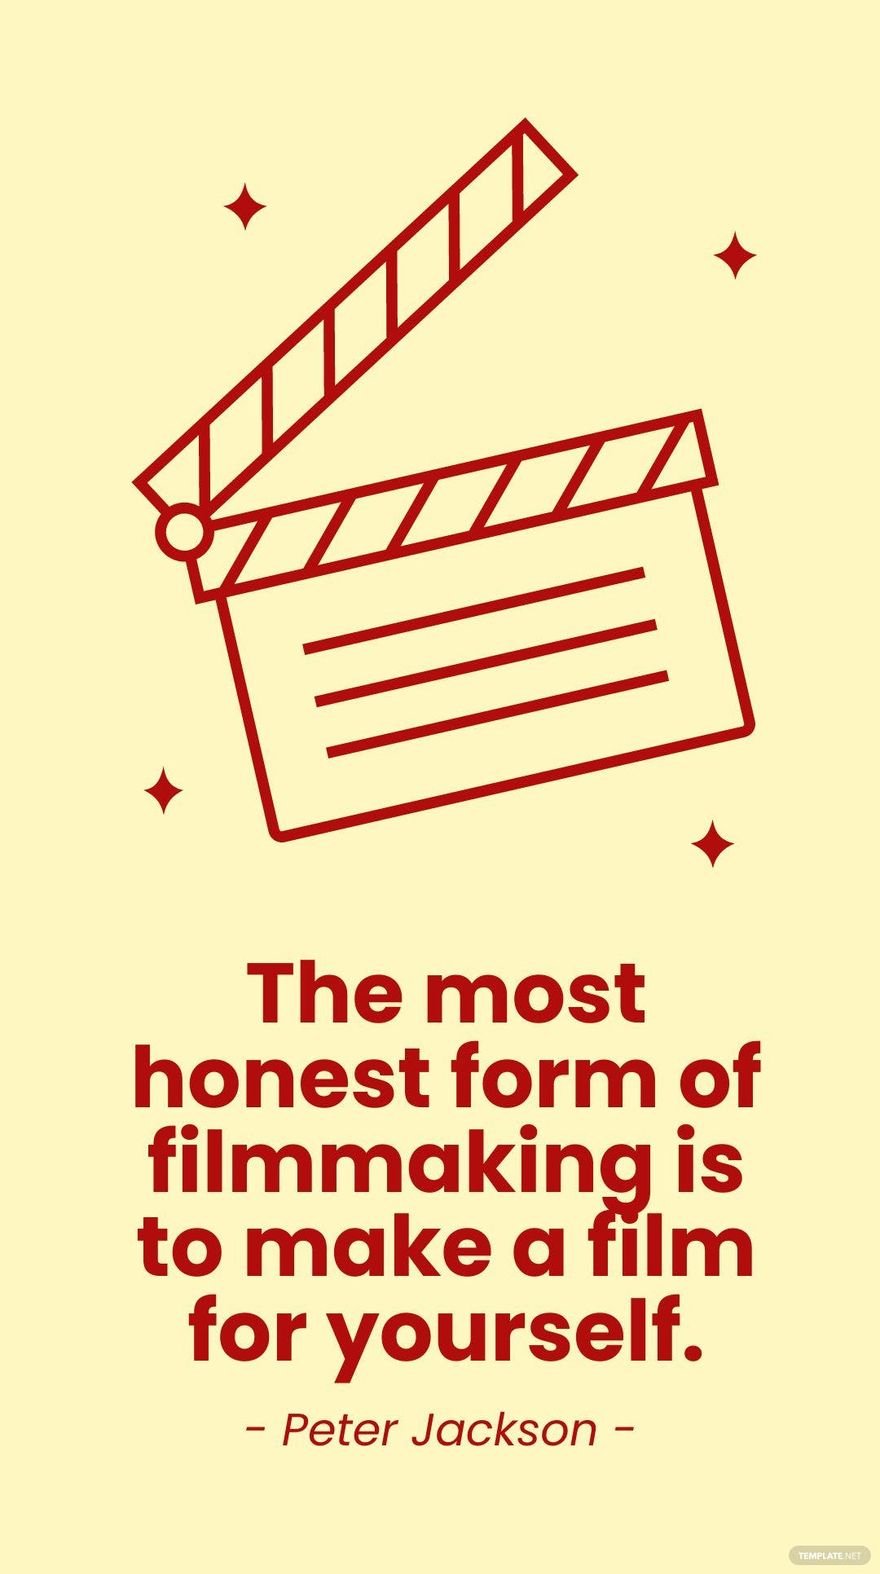 Peter Jackson - The most honest form of filmmaking is to make a film for yourself.